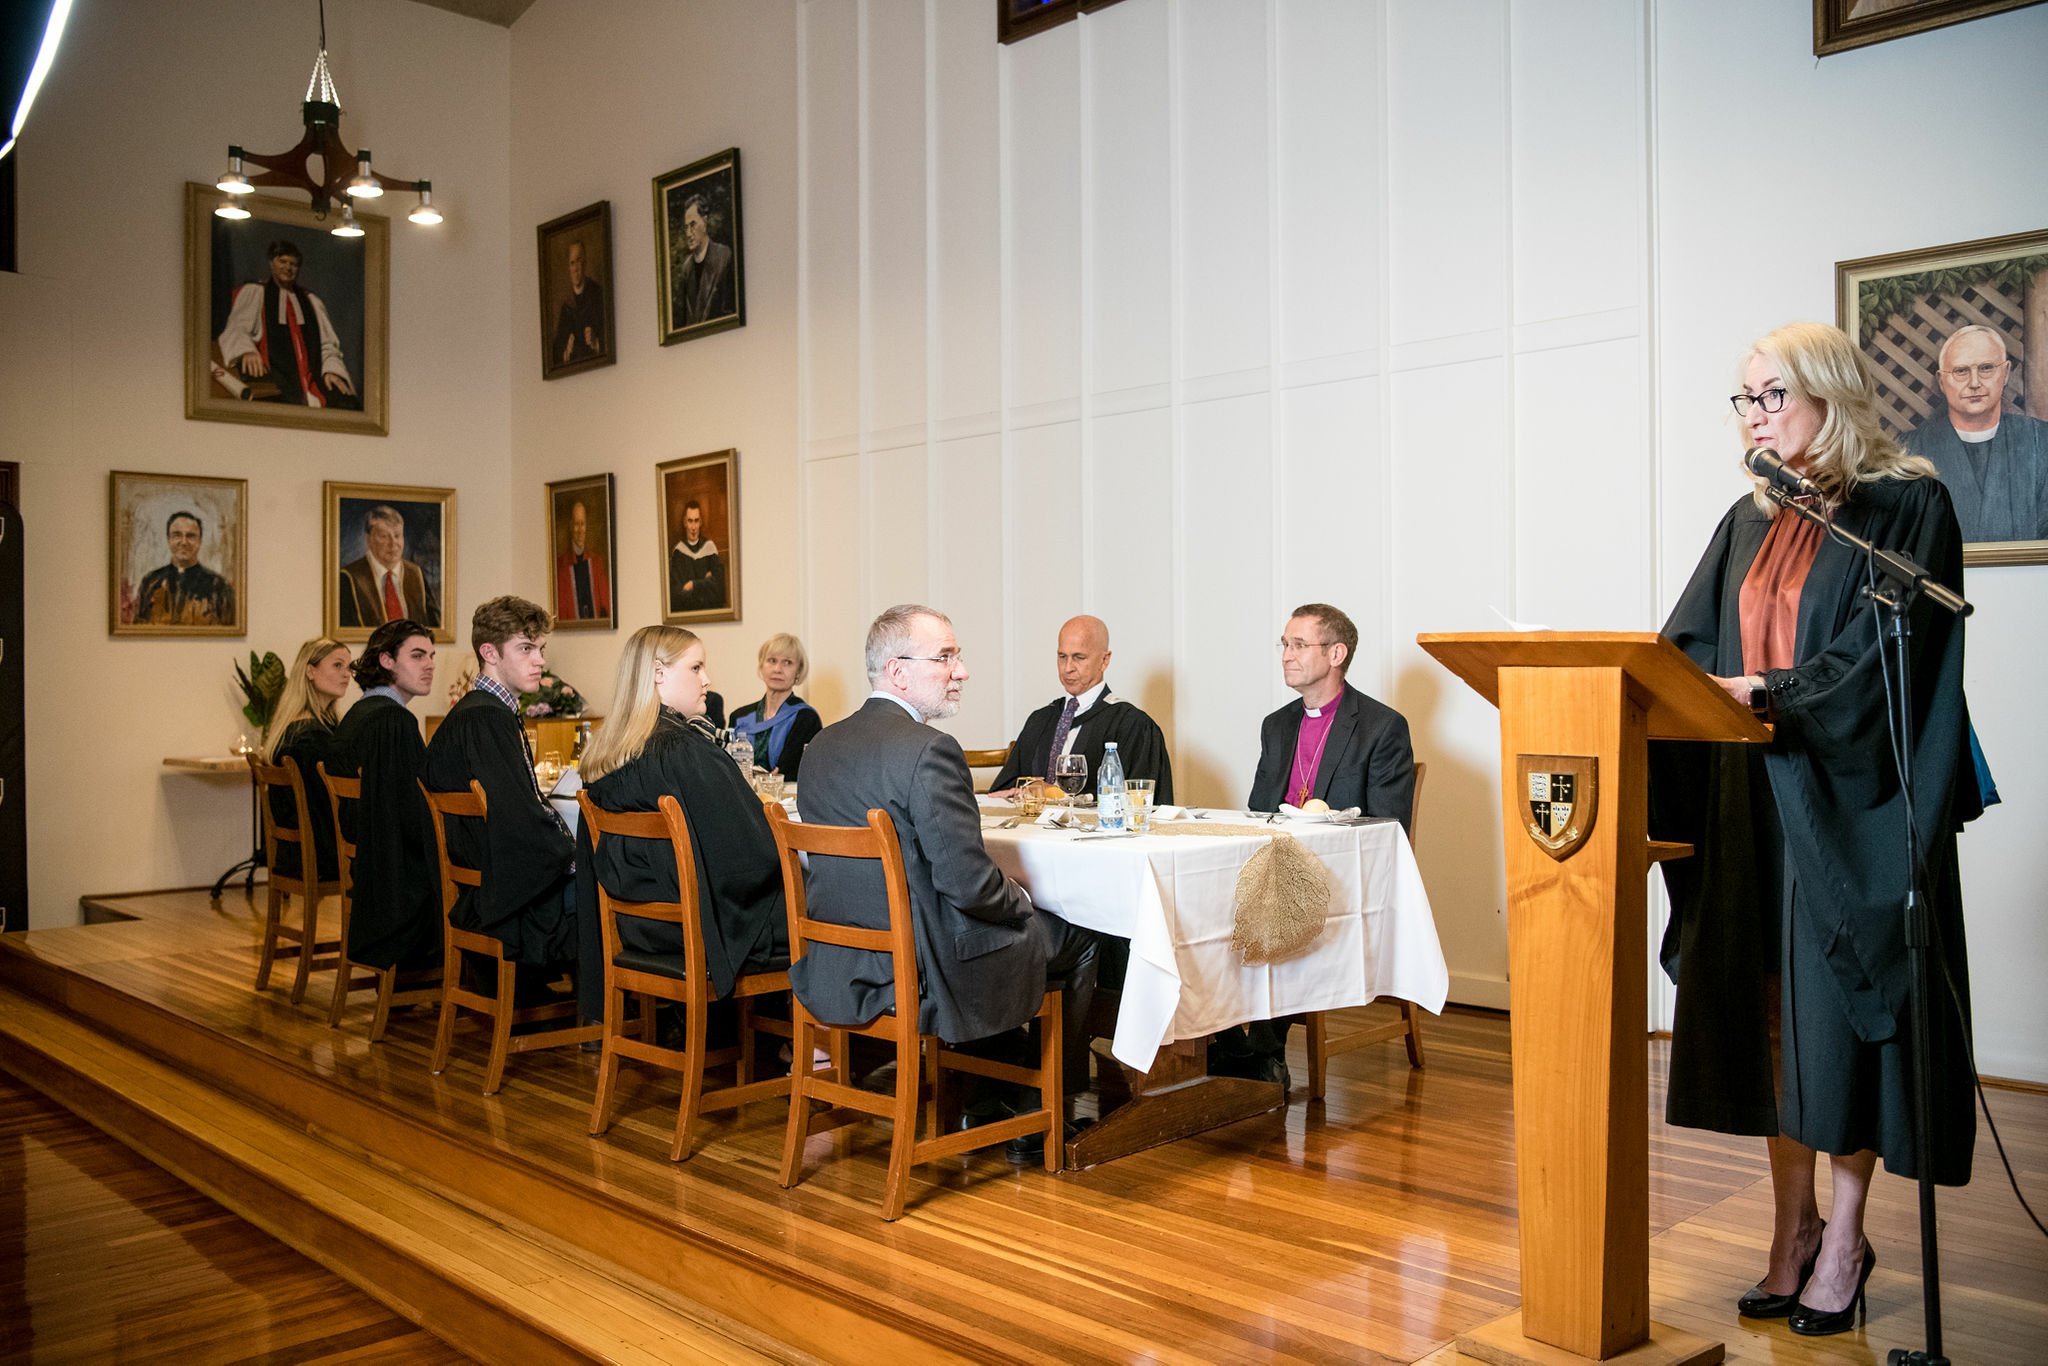 Ceremony in formal robes at SJC residential college UQ dinner